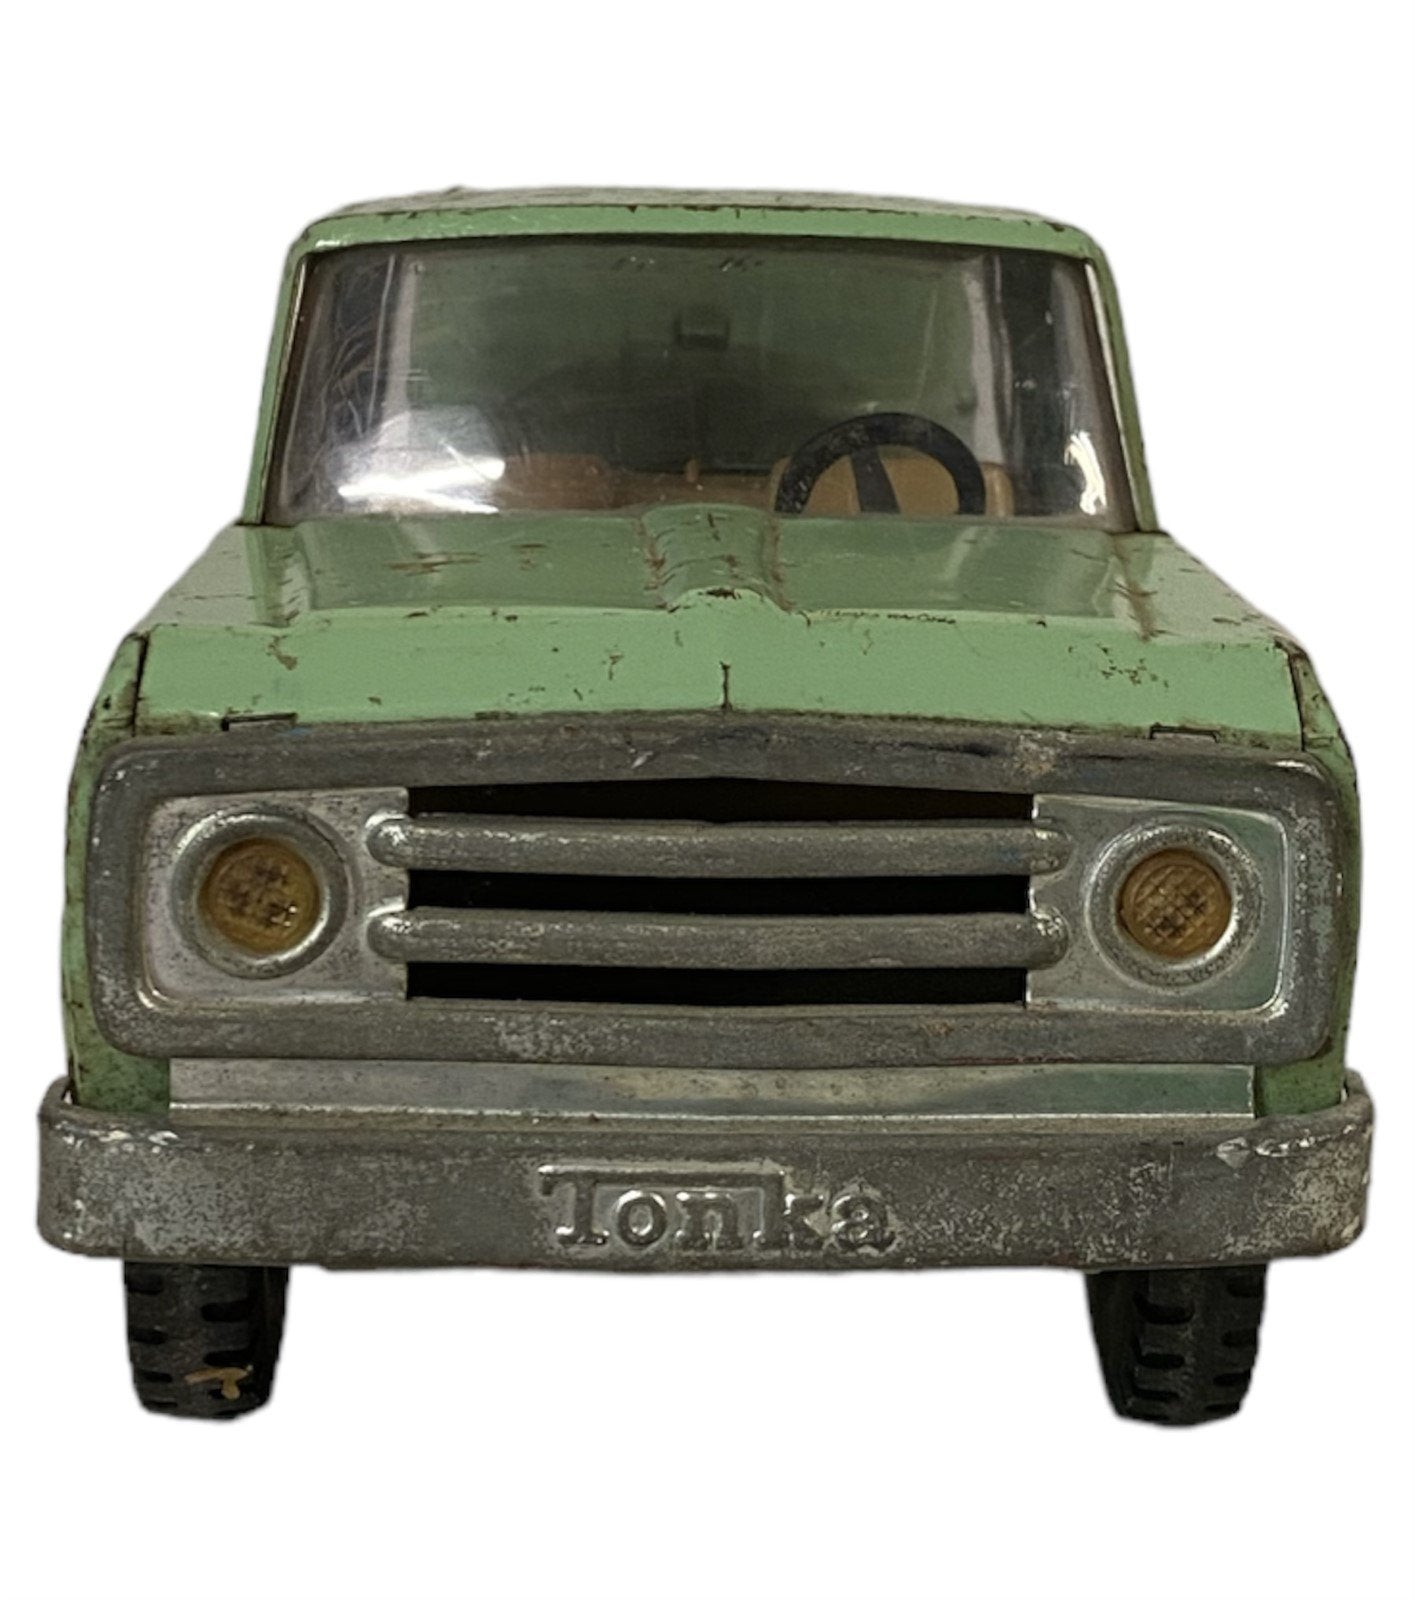 Tonka Horse Farms Mint Green Truck Collectible Vintage